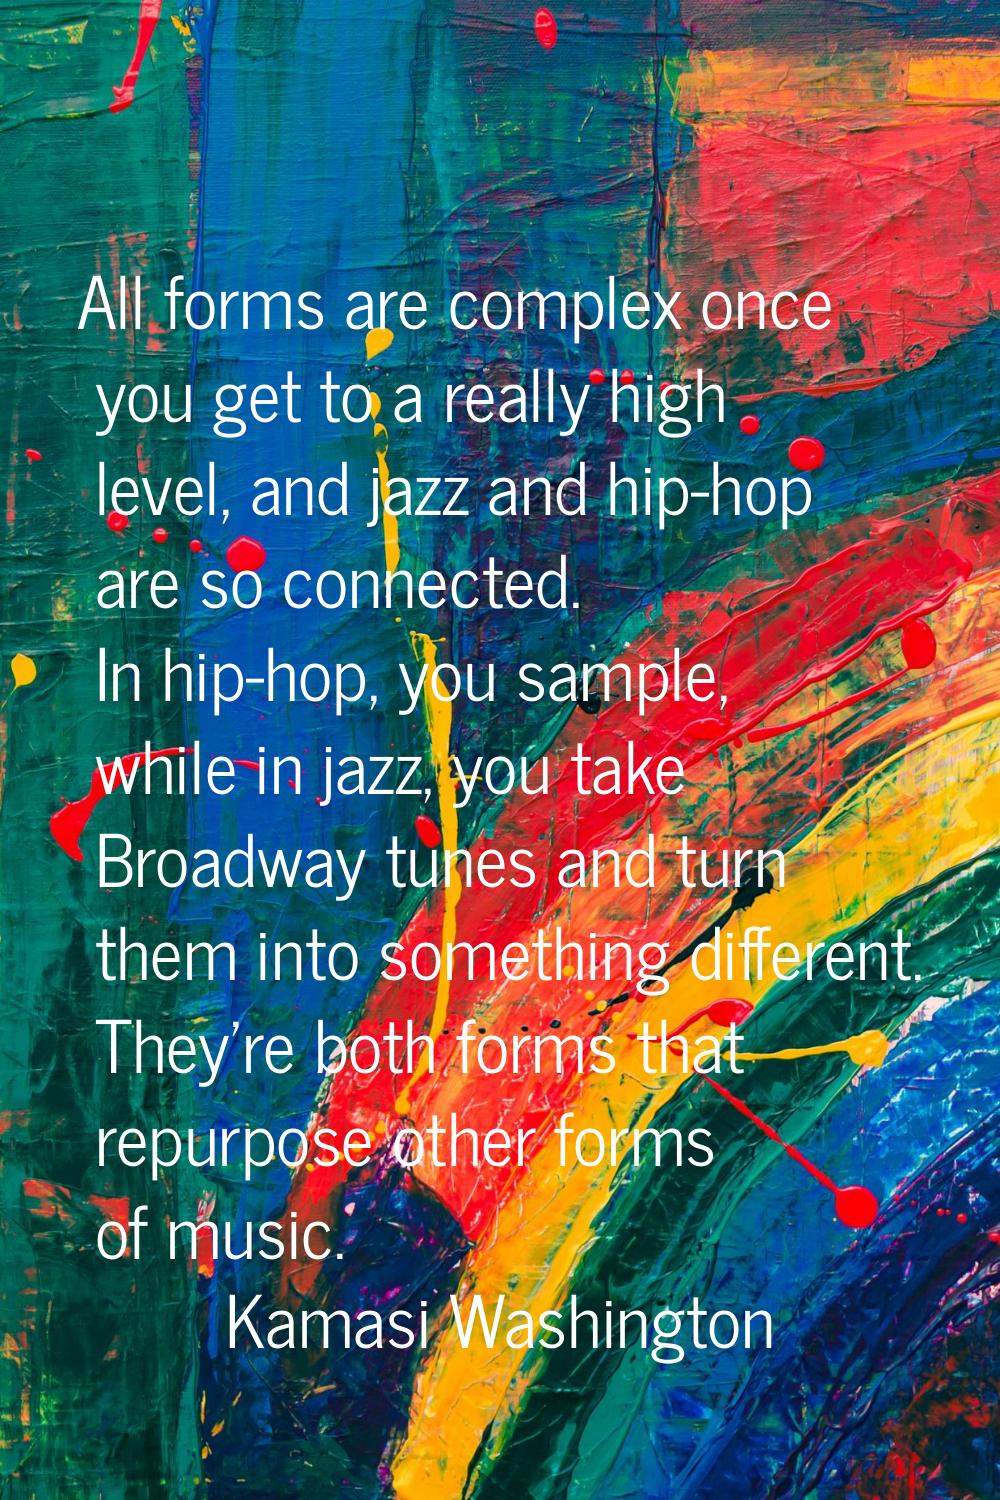 All forms are complex once you get to a really high level, and jazz and hip-hop are so connected. I